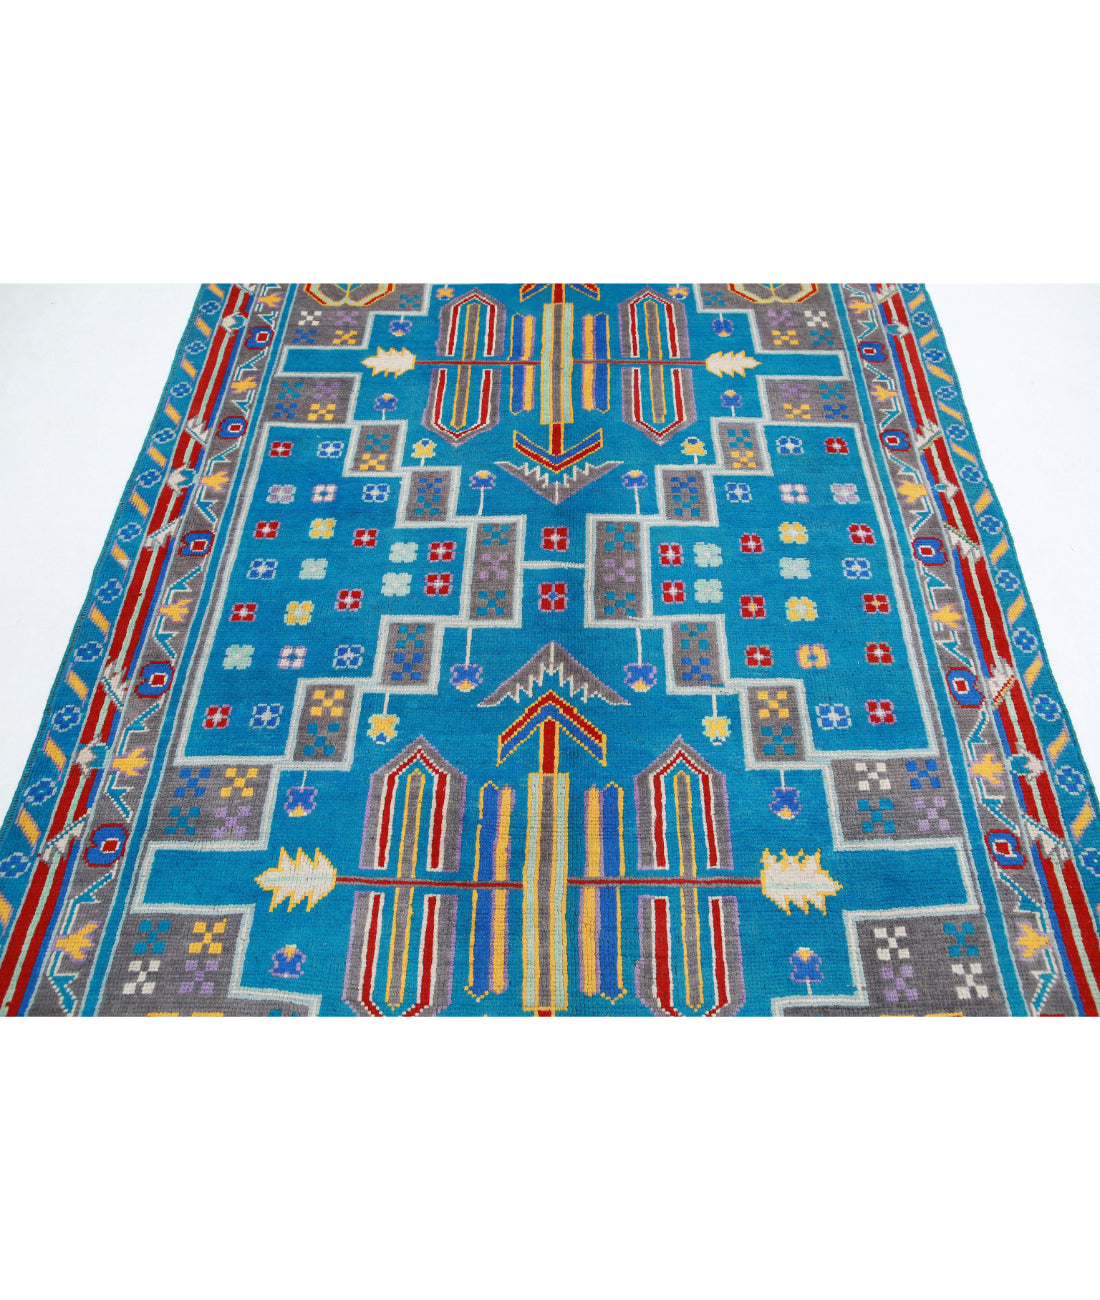 Revival 5'7'' X 7'8'' Hand-Knotted Wool Rug 5'7'' x 7'8'' (168 X 230) / Teal / Grey